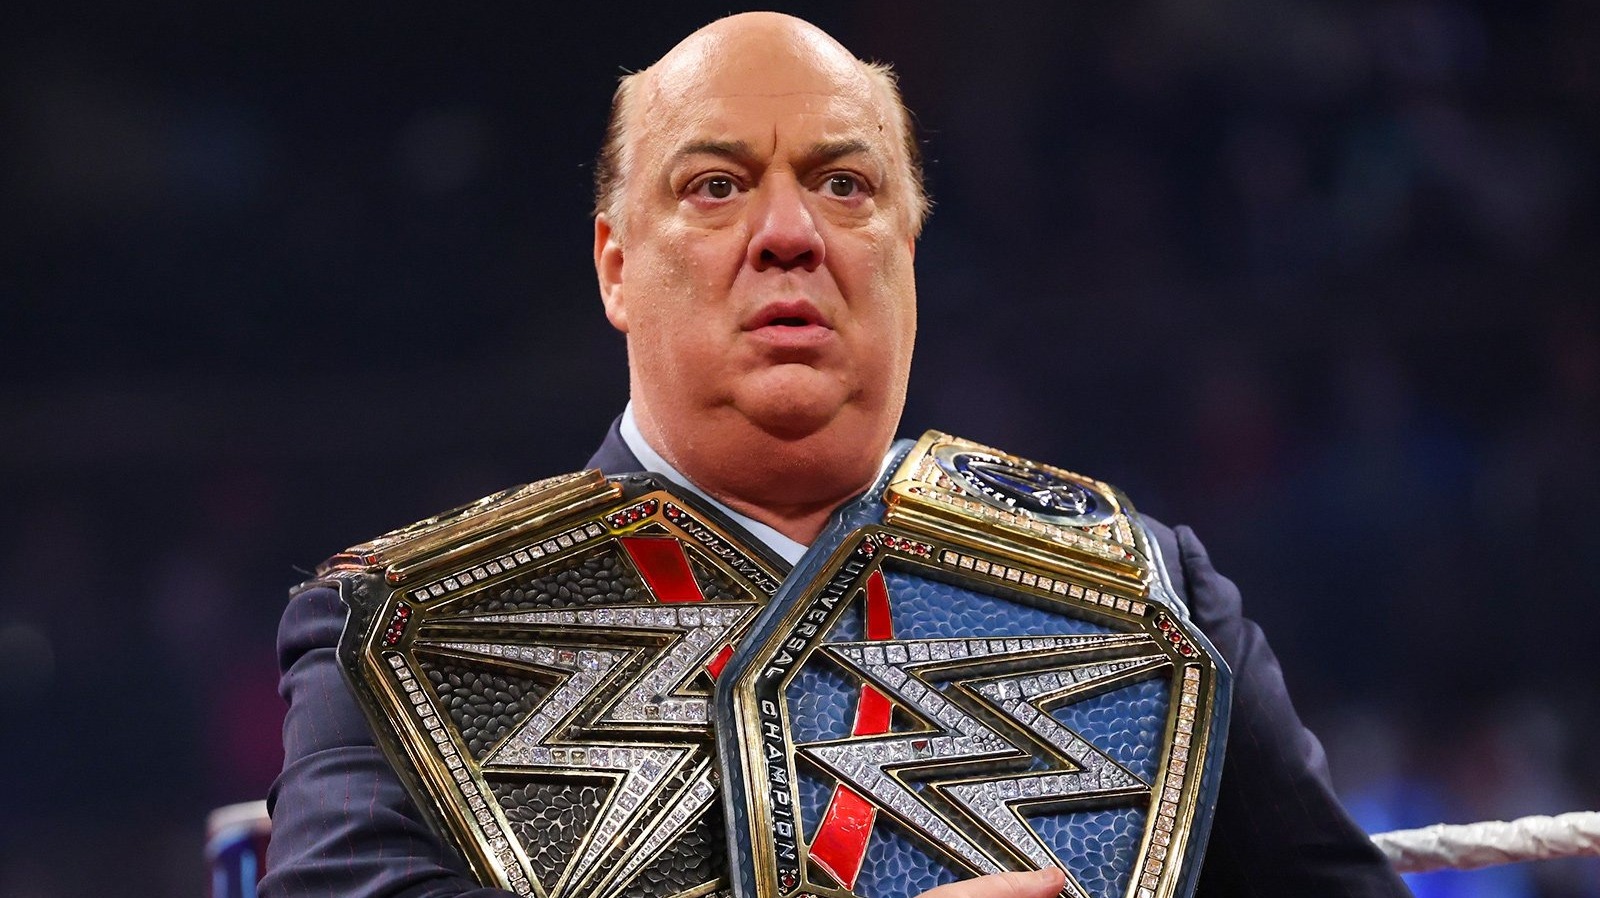 WWE's Paul Heyman Claims GOAT Manager Title Over Bobby Heenan: 'Screw Him, He's Dead'